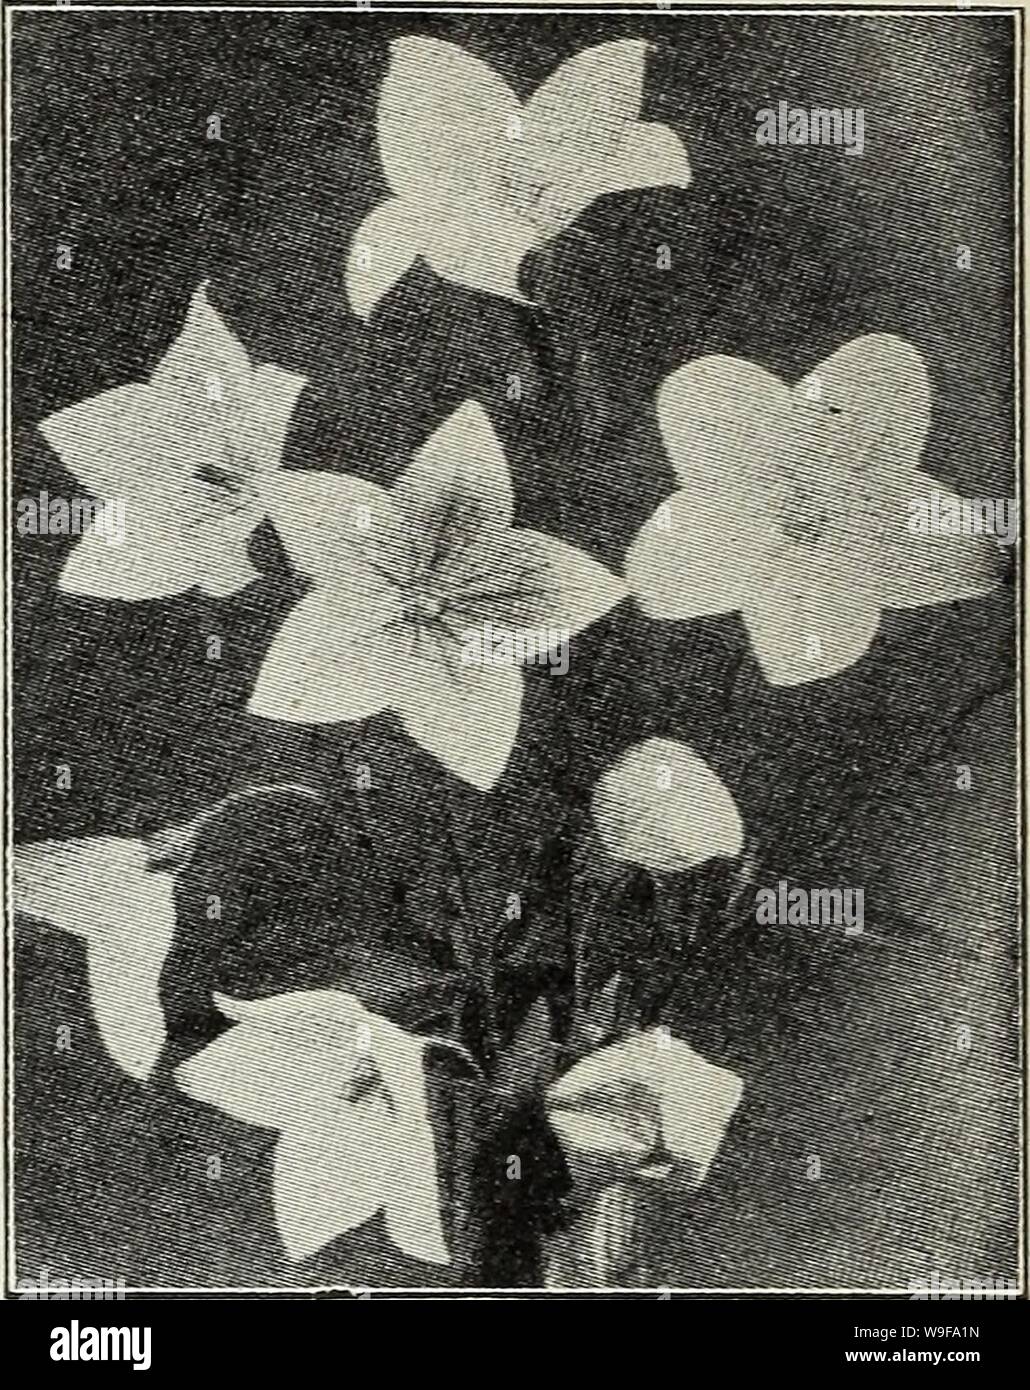 Archive image from page 25 of Currie's autumn 1929 54th year. Currie's autumn 1929 54th year bulbs and plants  curriesautumn19219curr Year: 1929 ( RANUNCULUS (Buttercup) Acris fl. pi.—Double golden-yellow flowers. Repens, fl. pi.—A creeping variety with golden-yellow flowers. Price, each, 25c; per doz., 2.50. RUDEBECKIA (Cone Flowers) Fulgida—Orange yellow with black center. Golden Glow—Grows 6 feet high, bearing masses of double golden-yellow flowers. Purpurea—Large, reddish-purple flowers with brown cone. Price, each, 25c; per dozen, 2.50. SALVIA (Meadow Sage) Azurea Grandiflora—Bears pretty Stock Photo